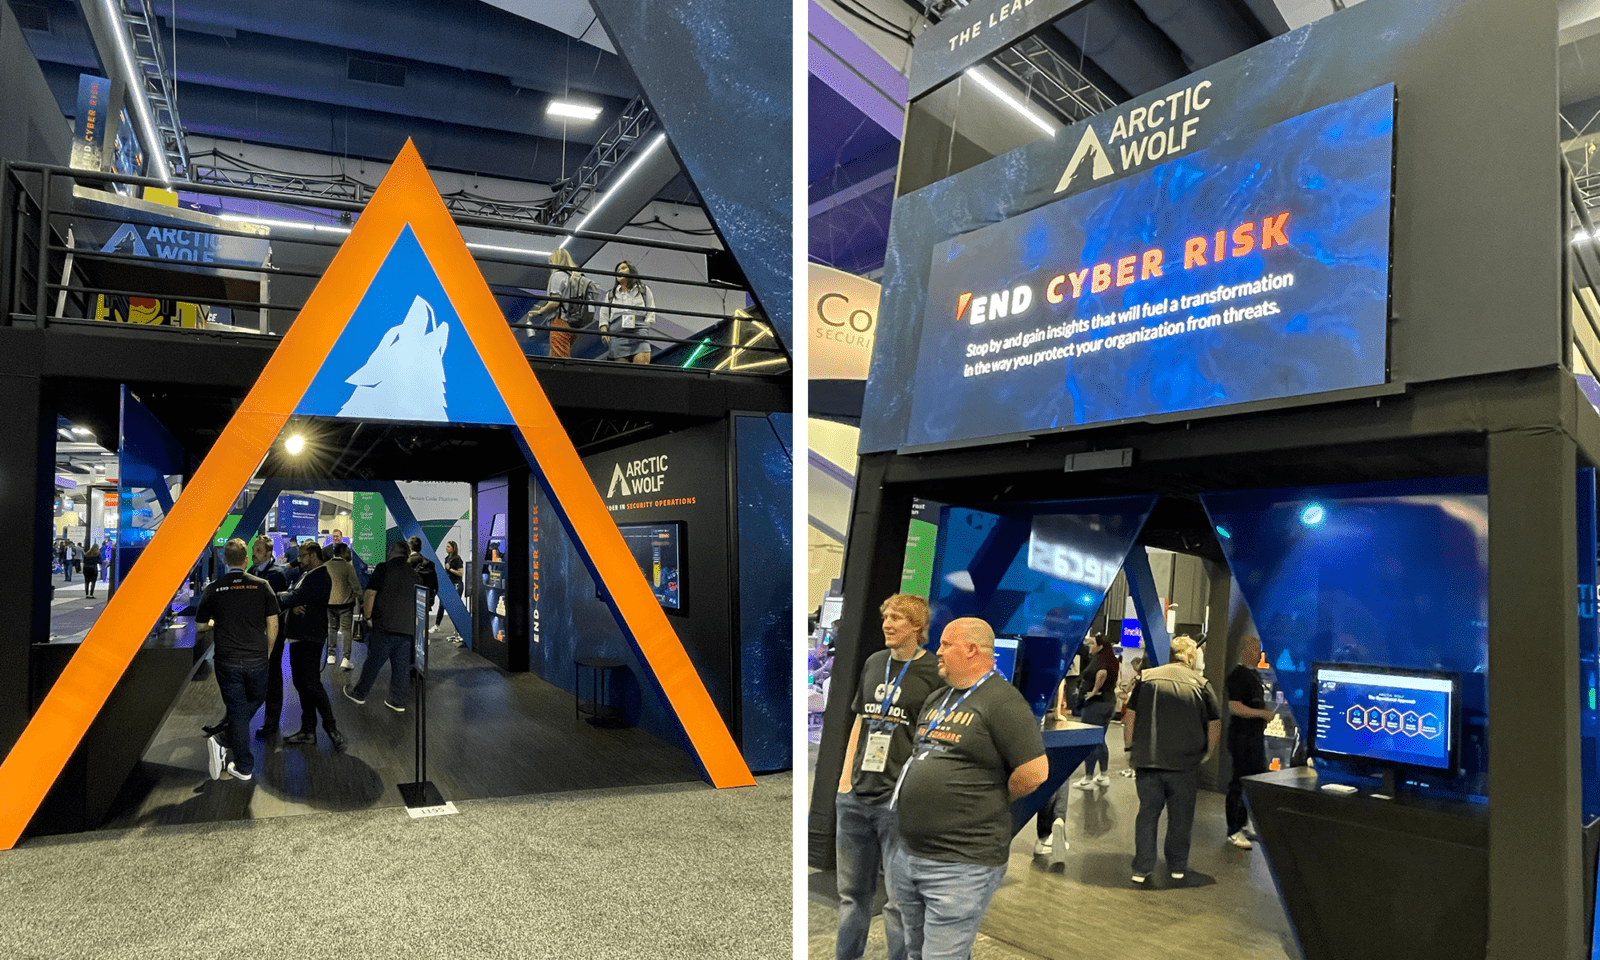 The entrance to the Arctic Wolf booth